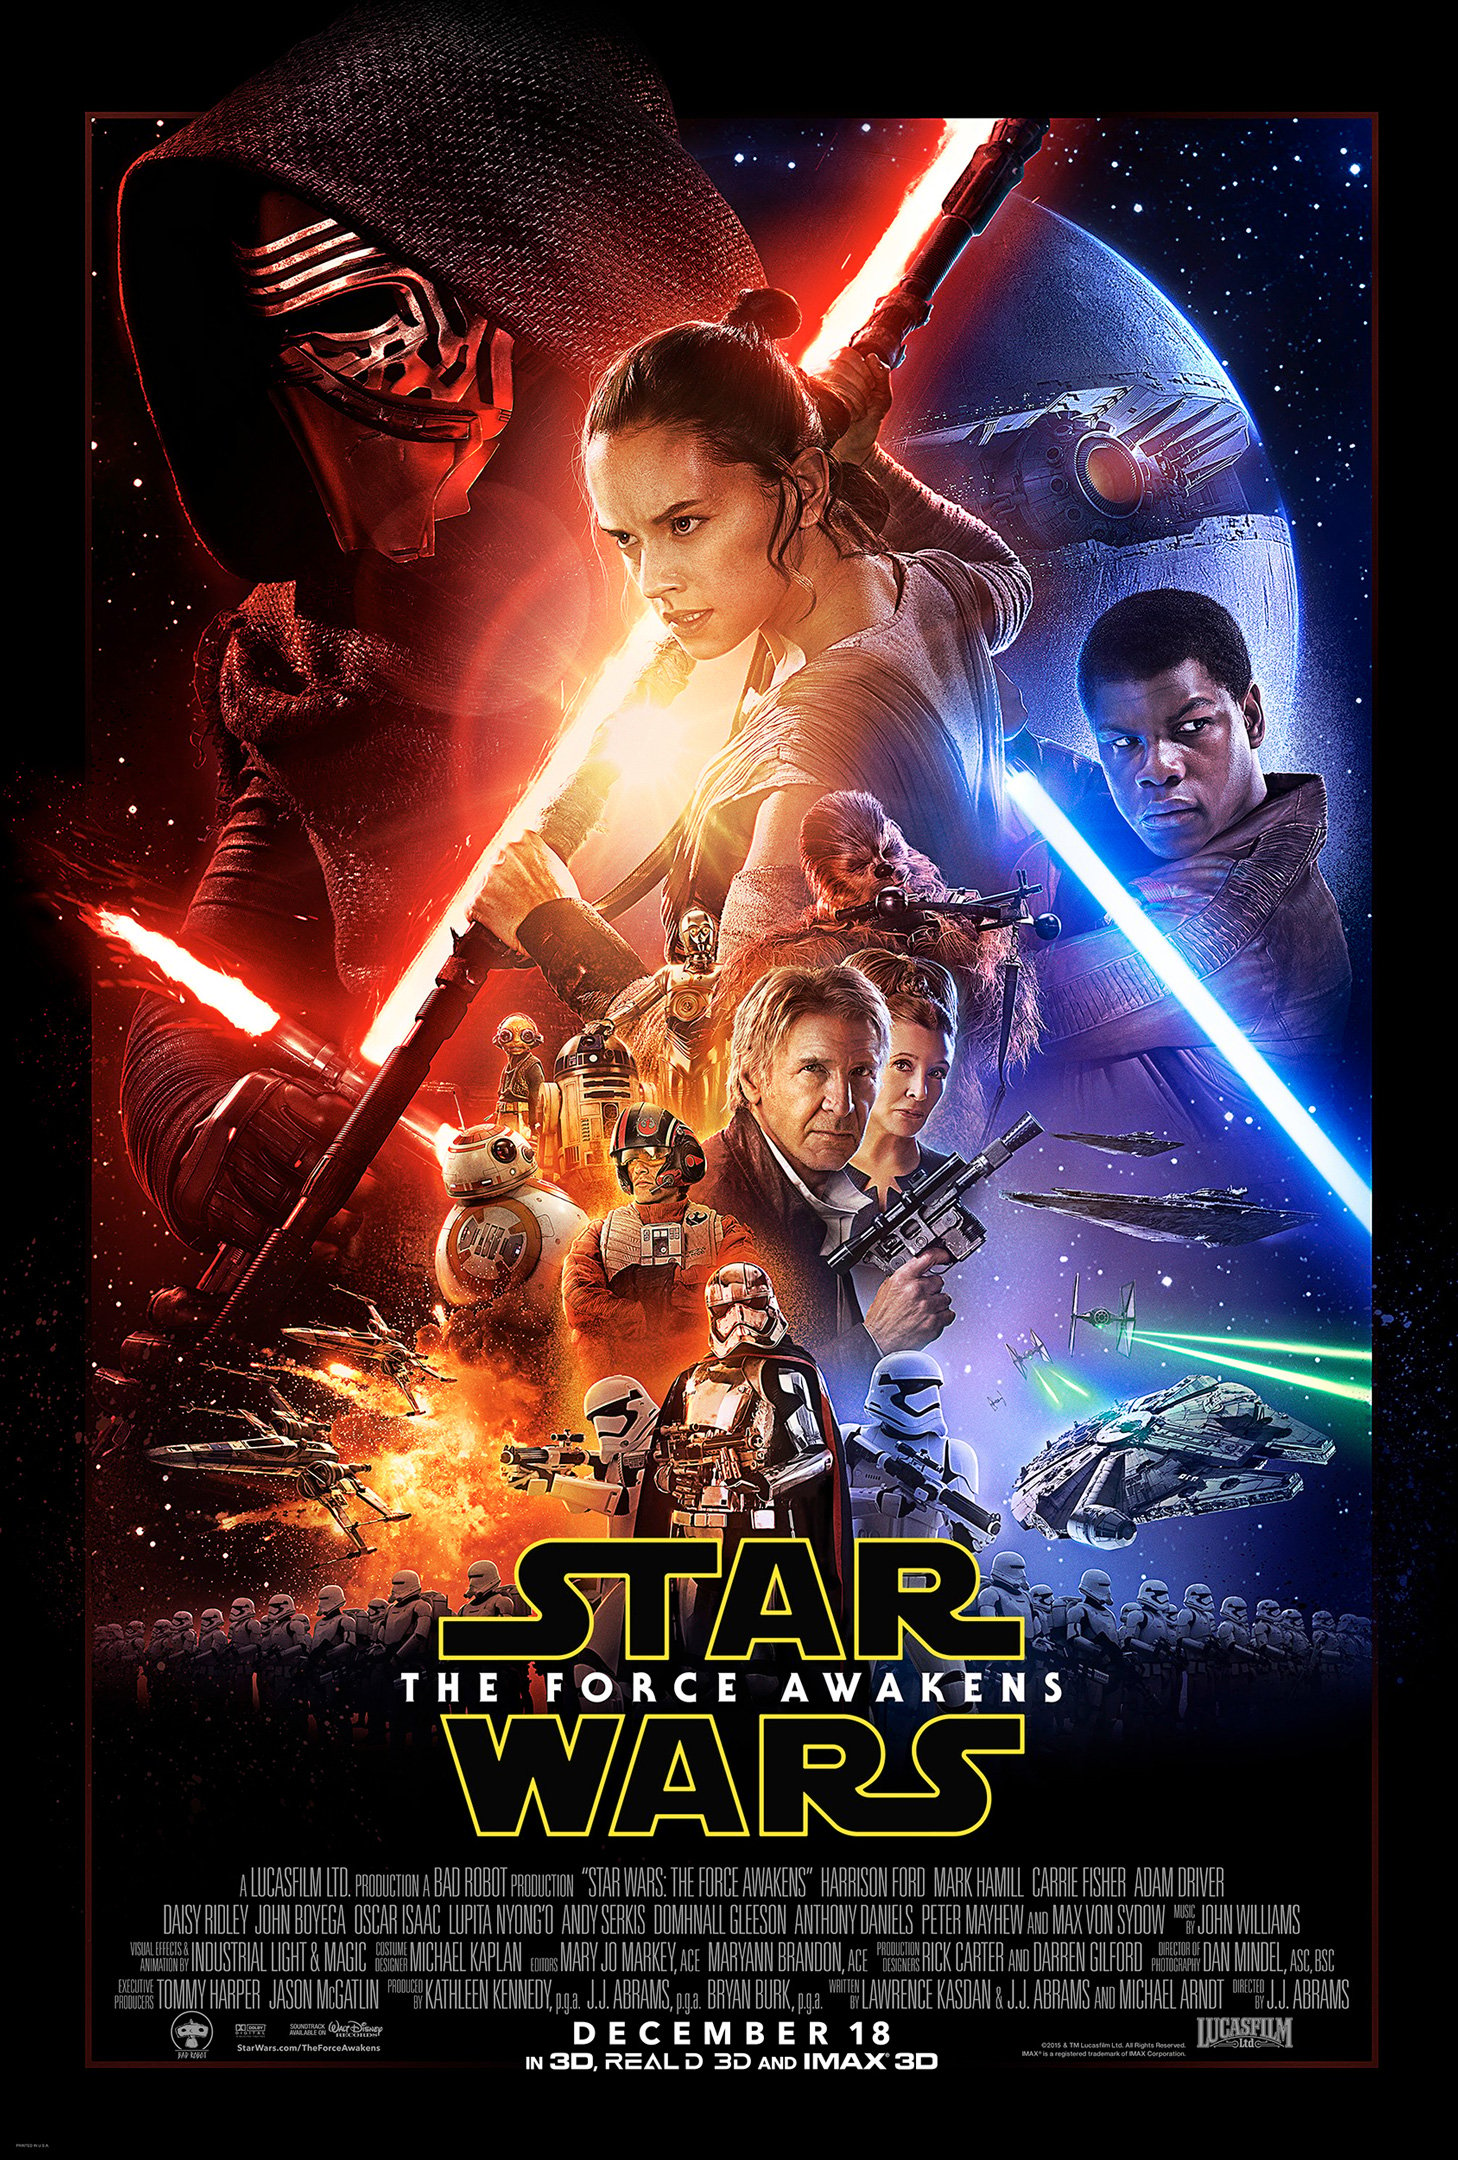 This is the new Star Wars The Force Awakens poster.